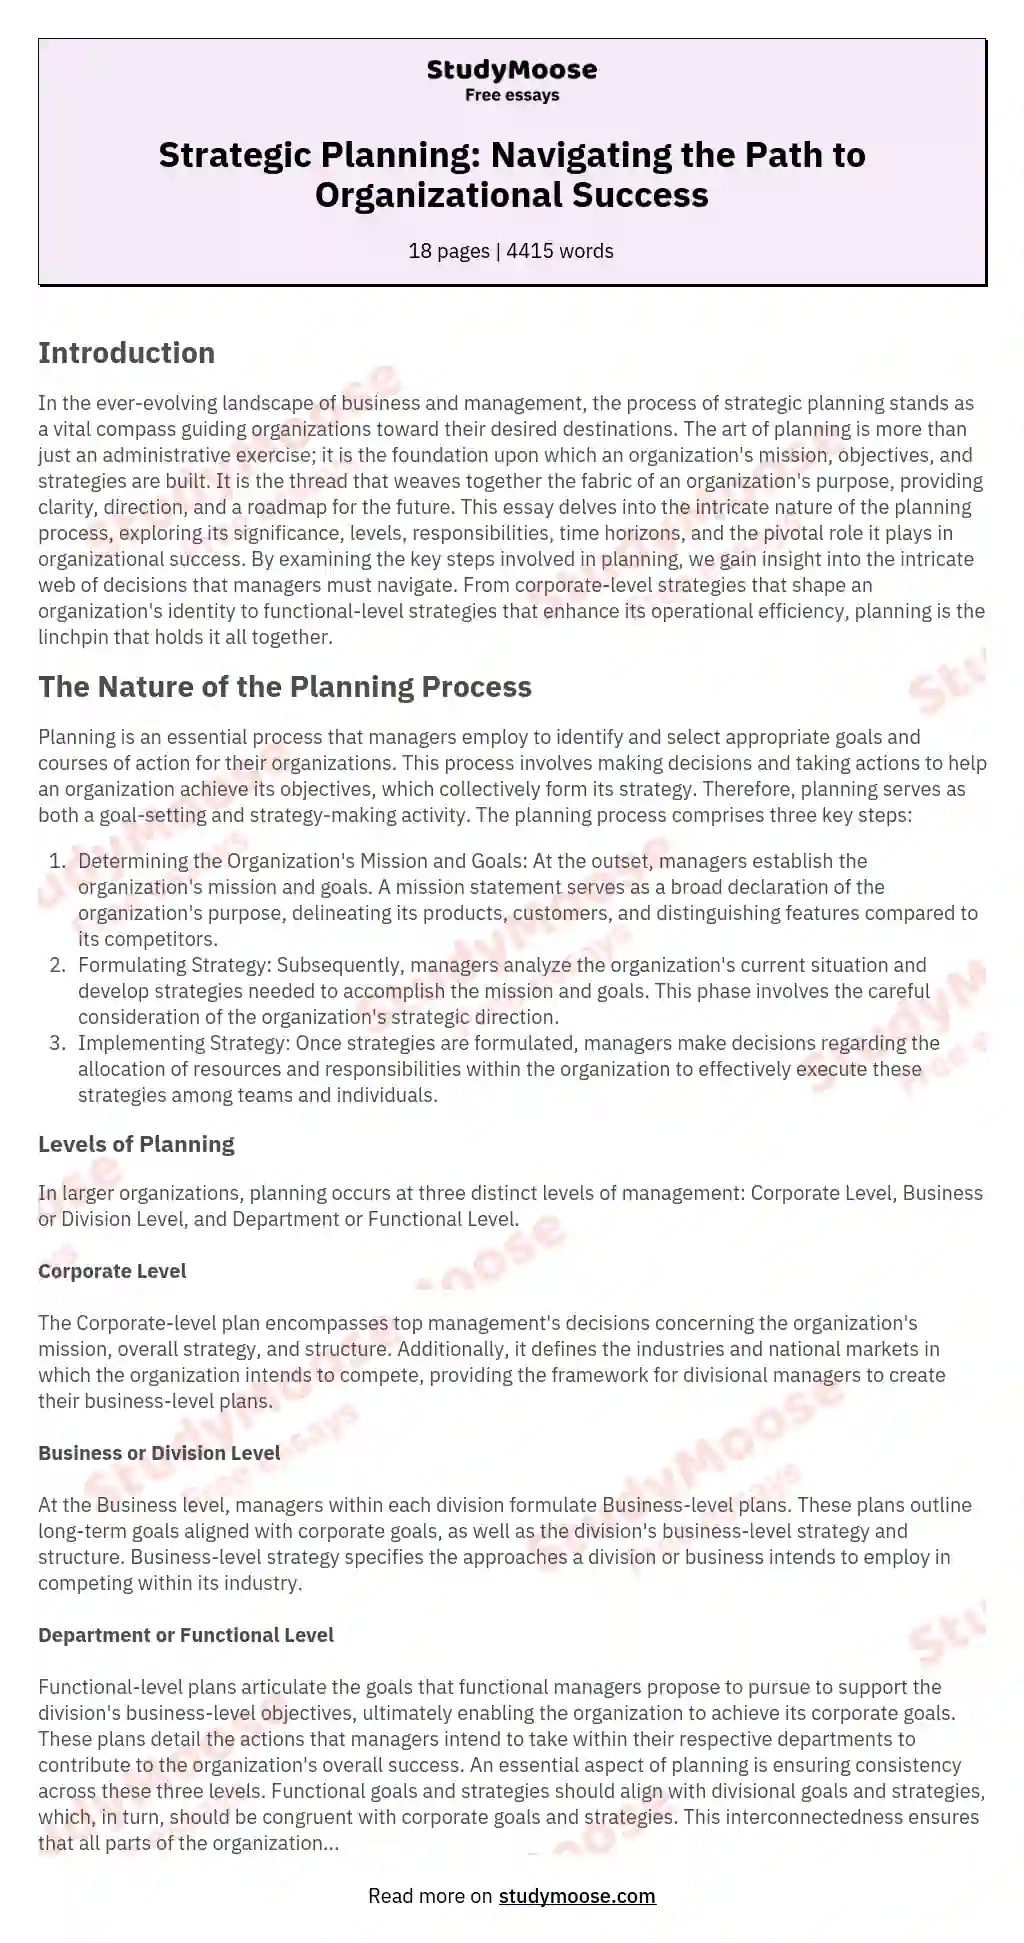 The Nature of the Planning Process